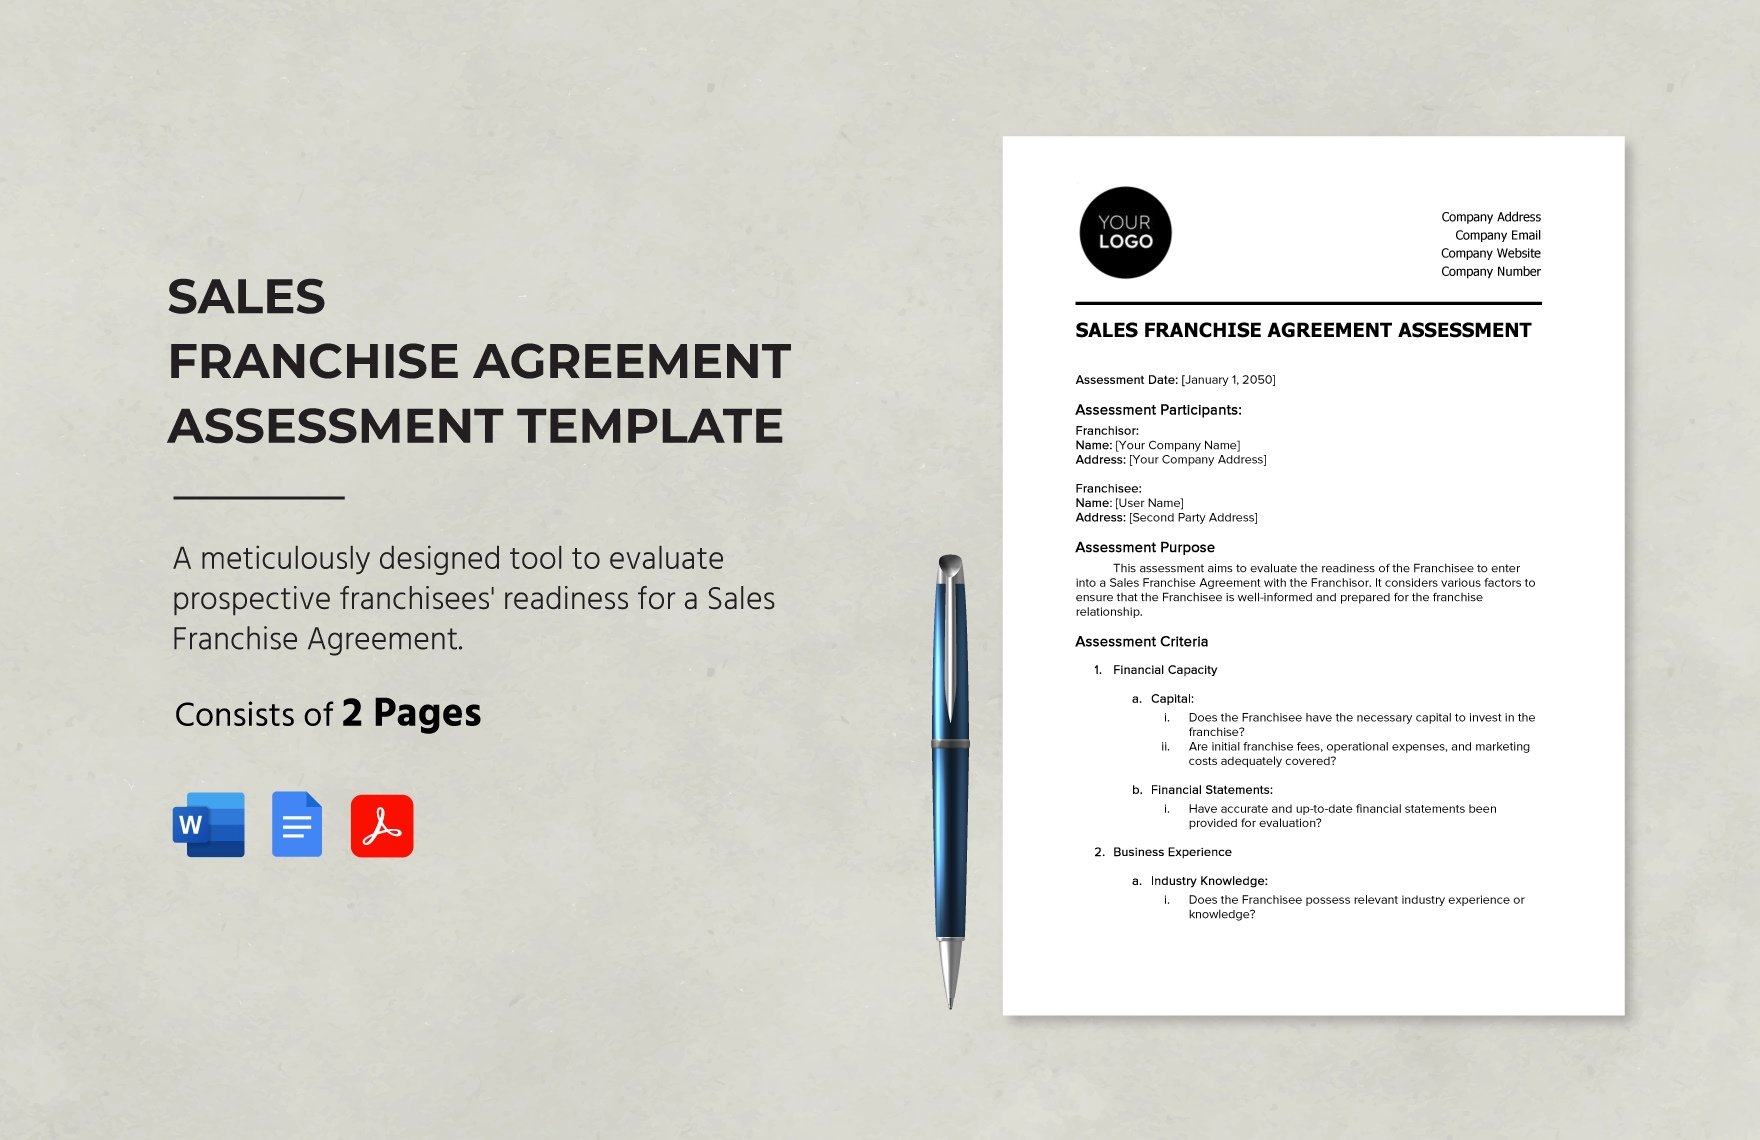 Sales Franchise Agreement Assessment Template